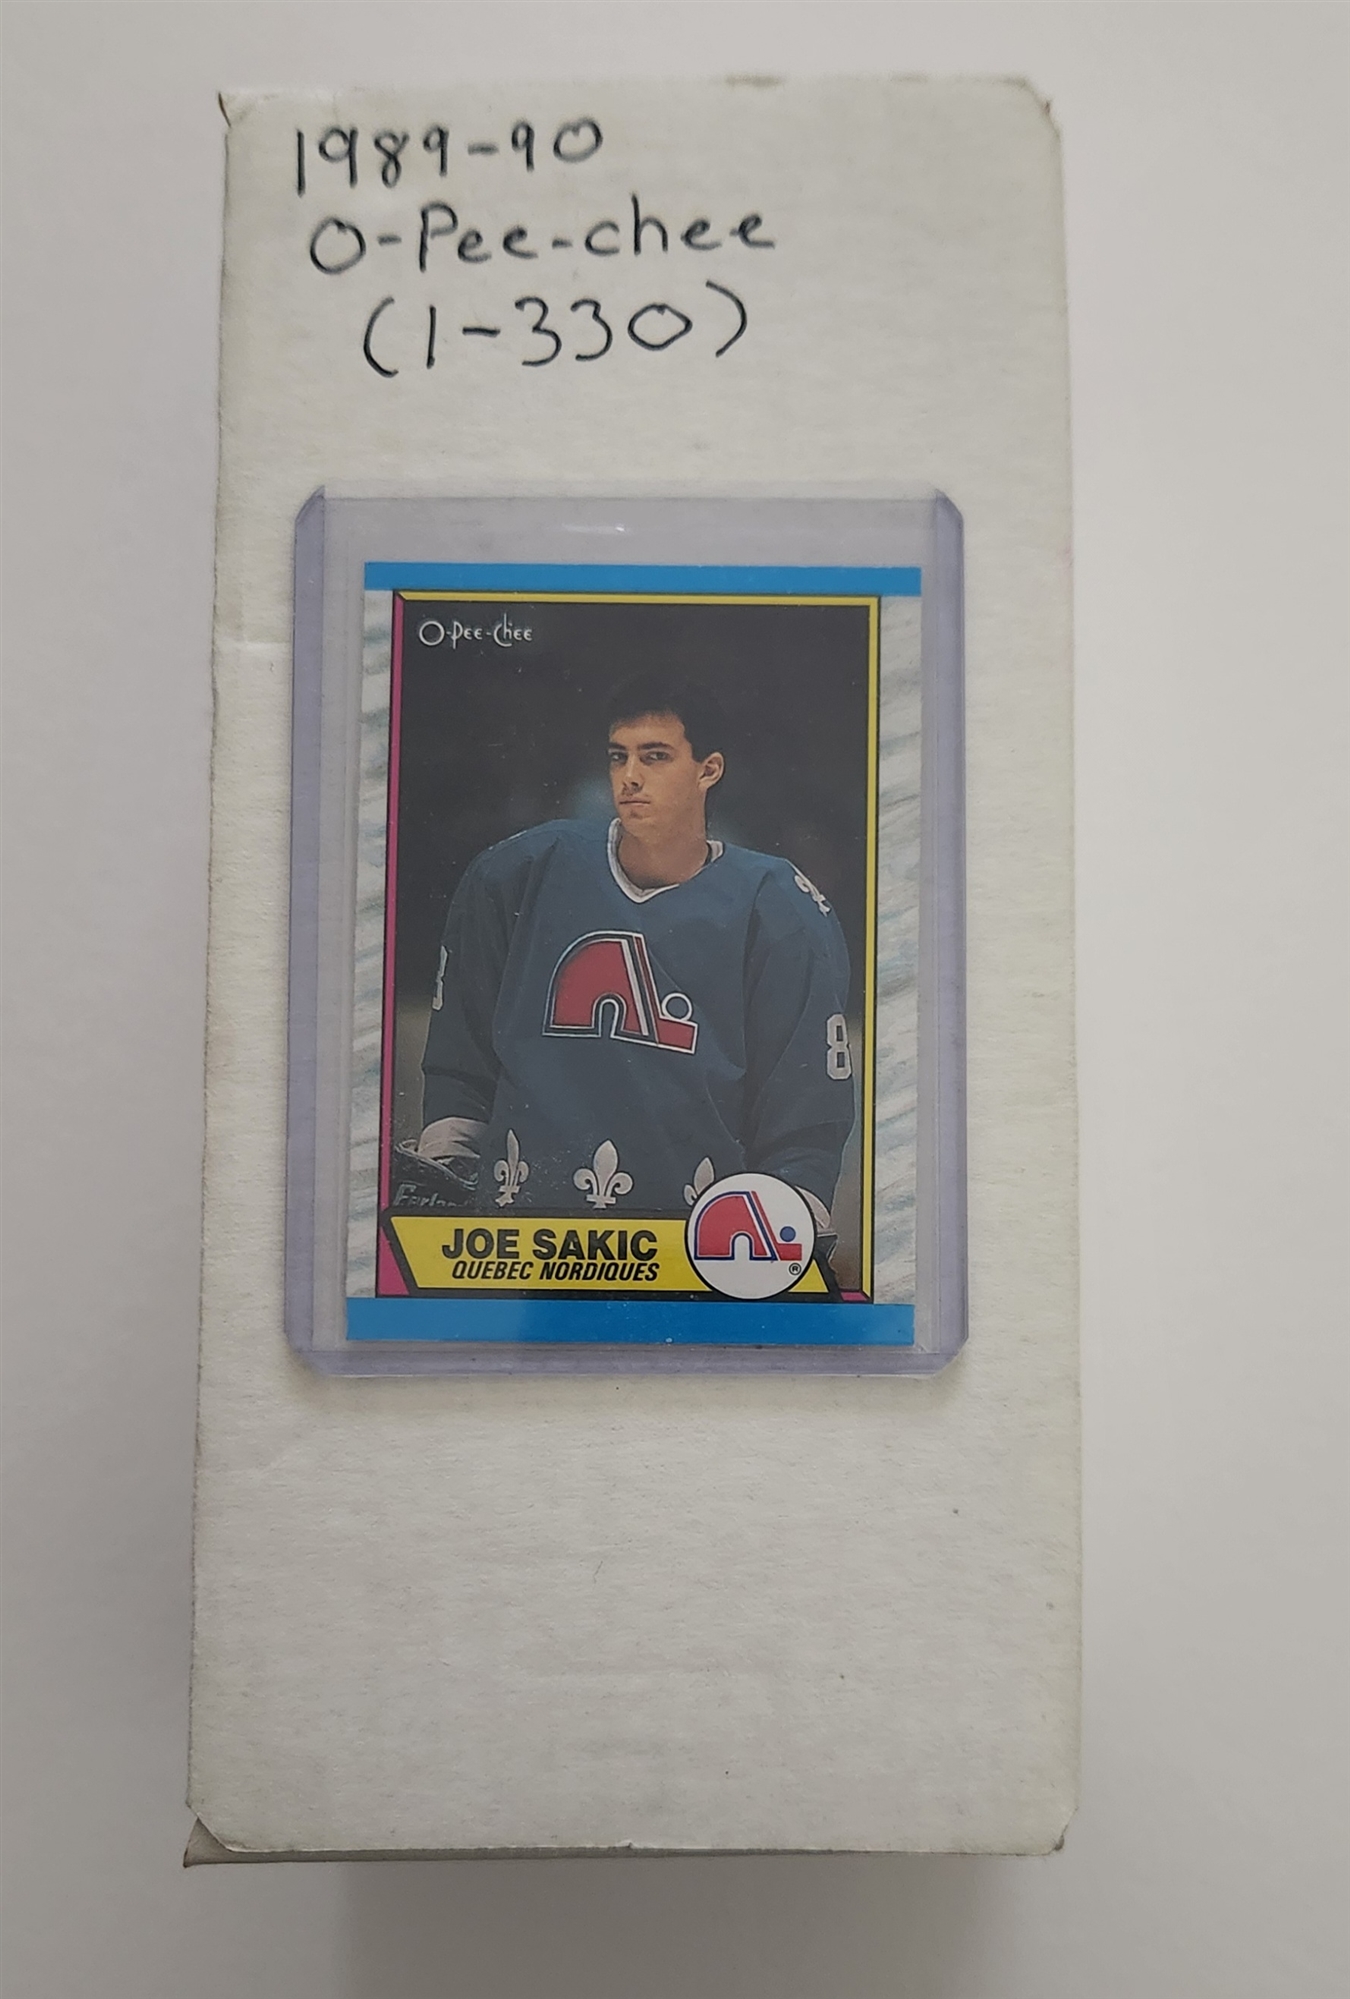 1989-90 O-Pee-Chee Hockey Complete Set with Sakic & Leetch Rookies